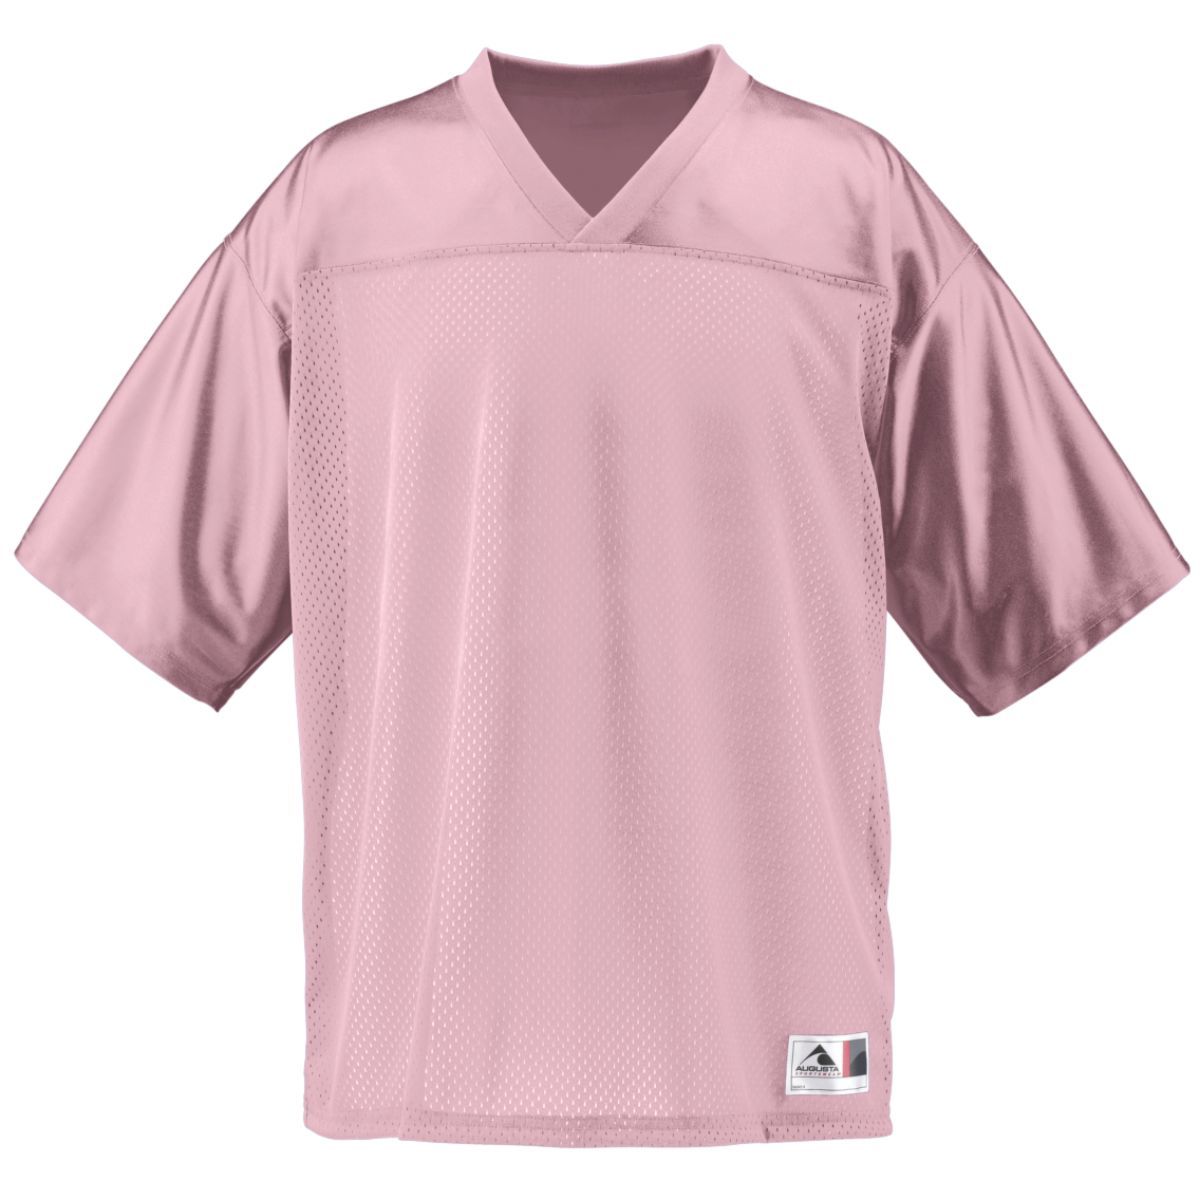 Augusta Sportswear Youth Stadium Replica Jersey in Light Pink  -Part of the Youth, Youth-Jersey, Augusta-Products, Football, Shirts, All-Sports, All-Sports-1 product lines at KanaleyCreations.com